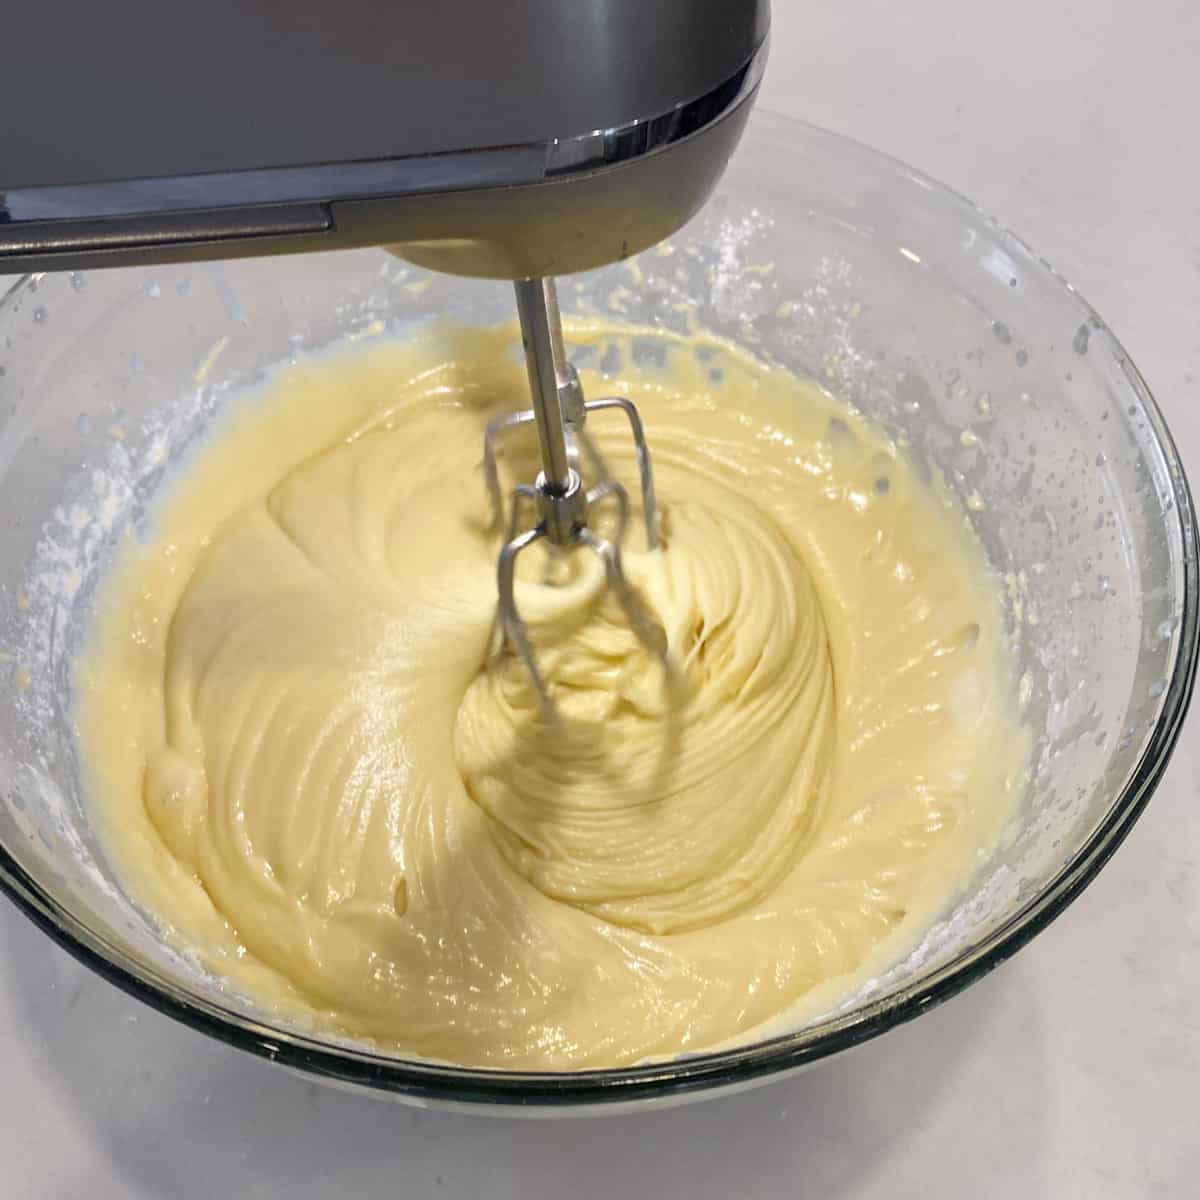 A bowl of cake batter being mixed with an electric mixer.